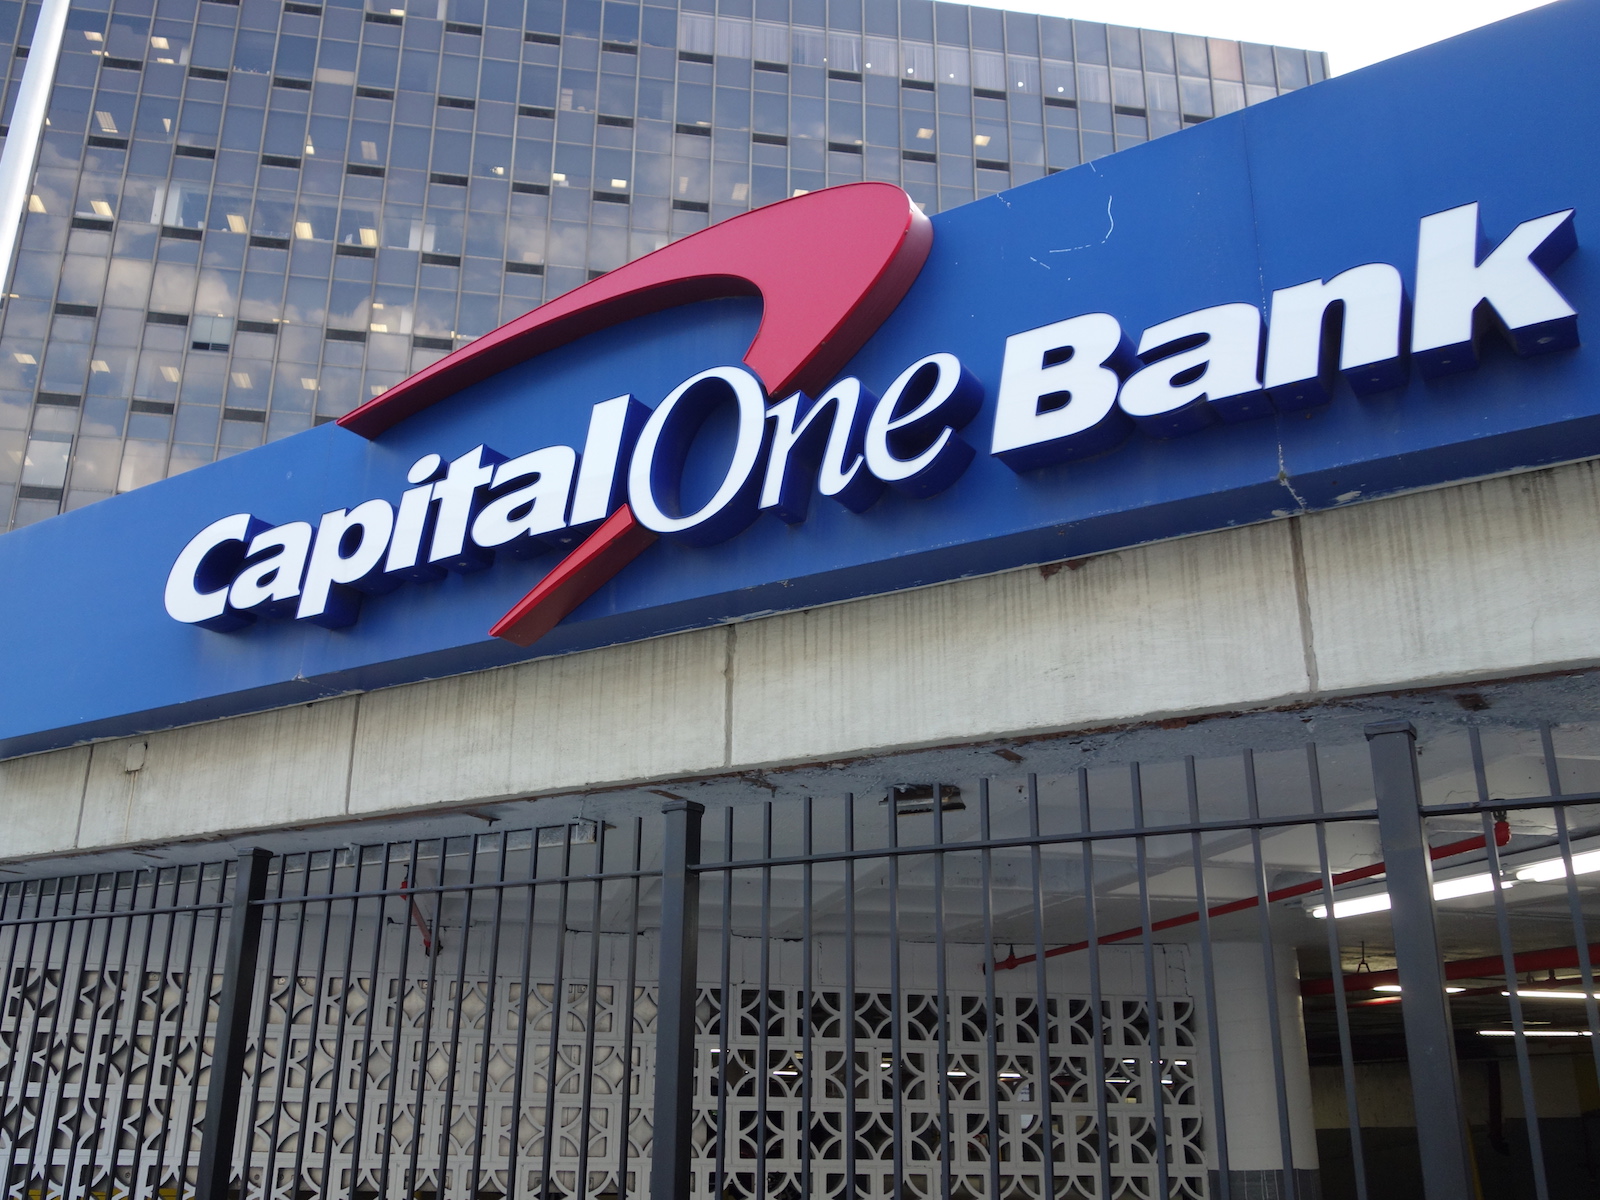 Capital One transfer cash back to miles